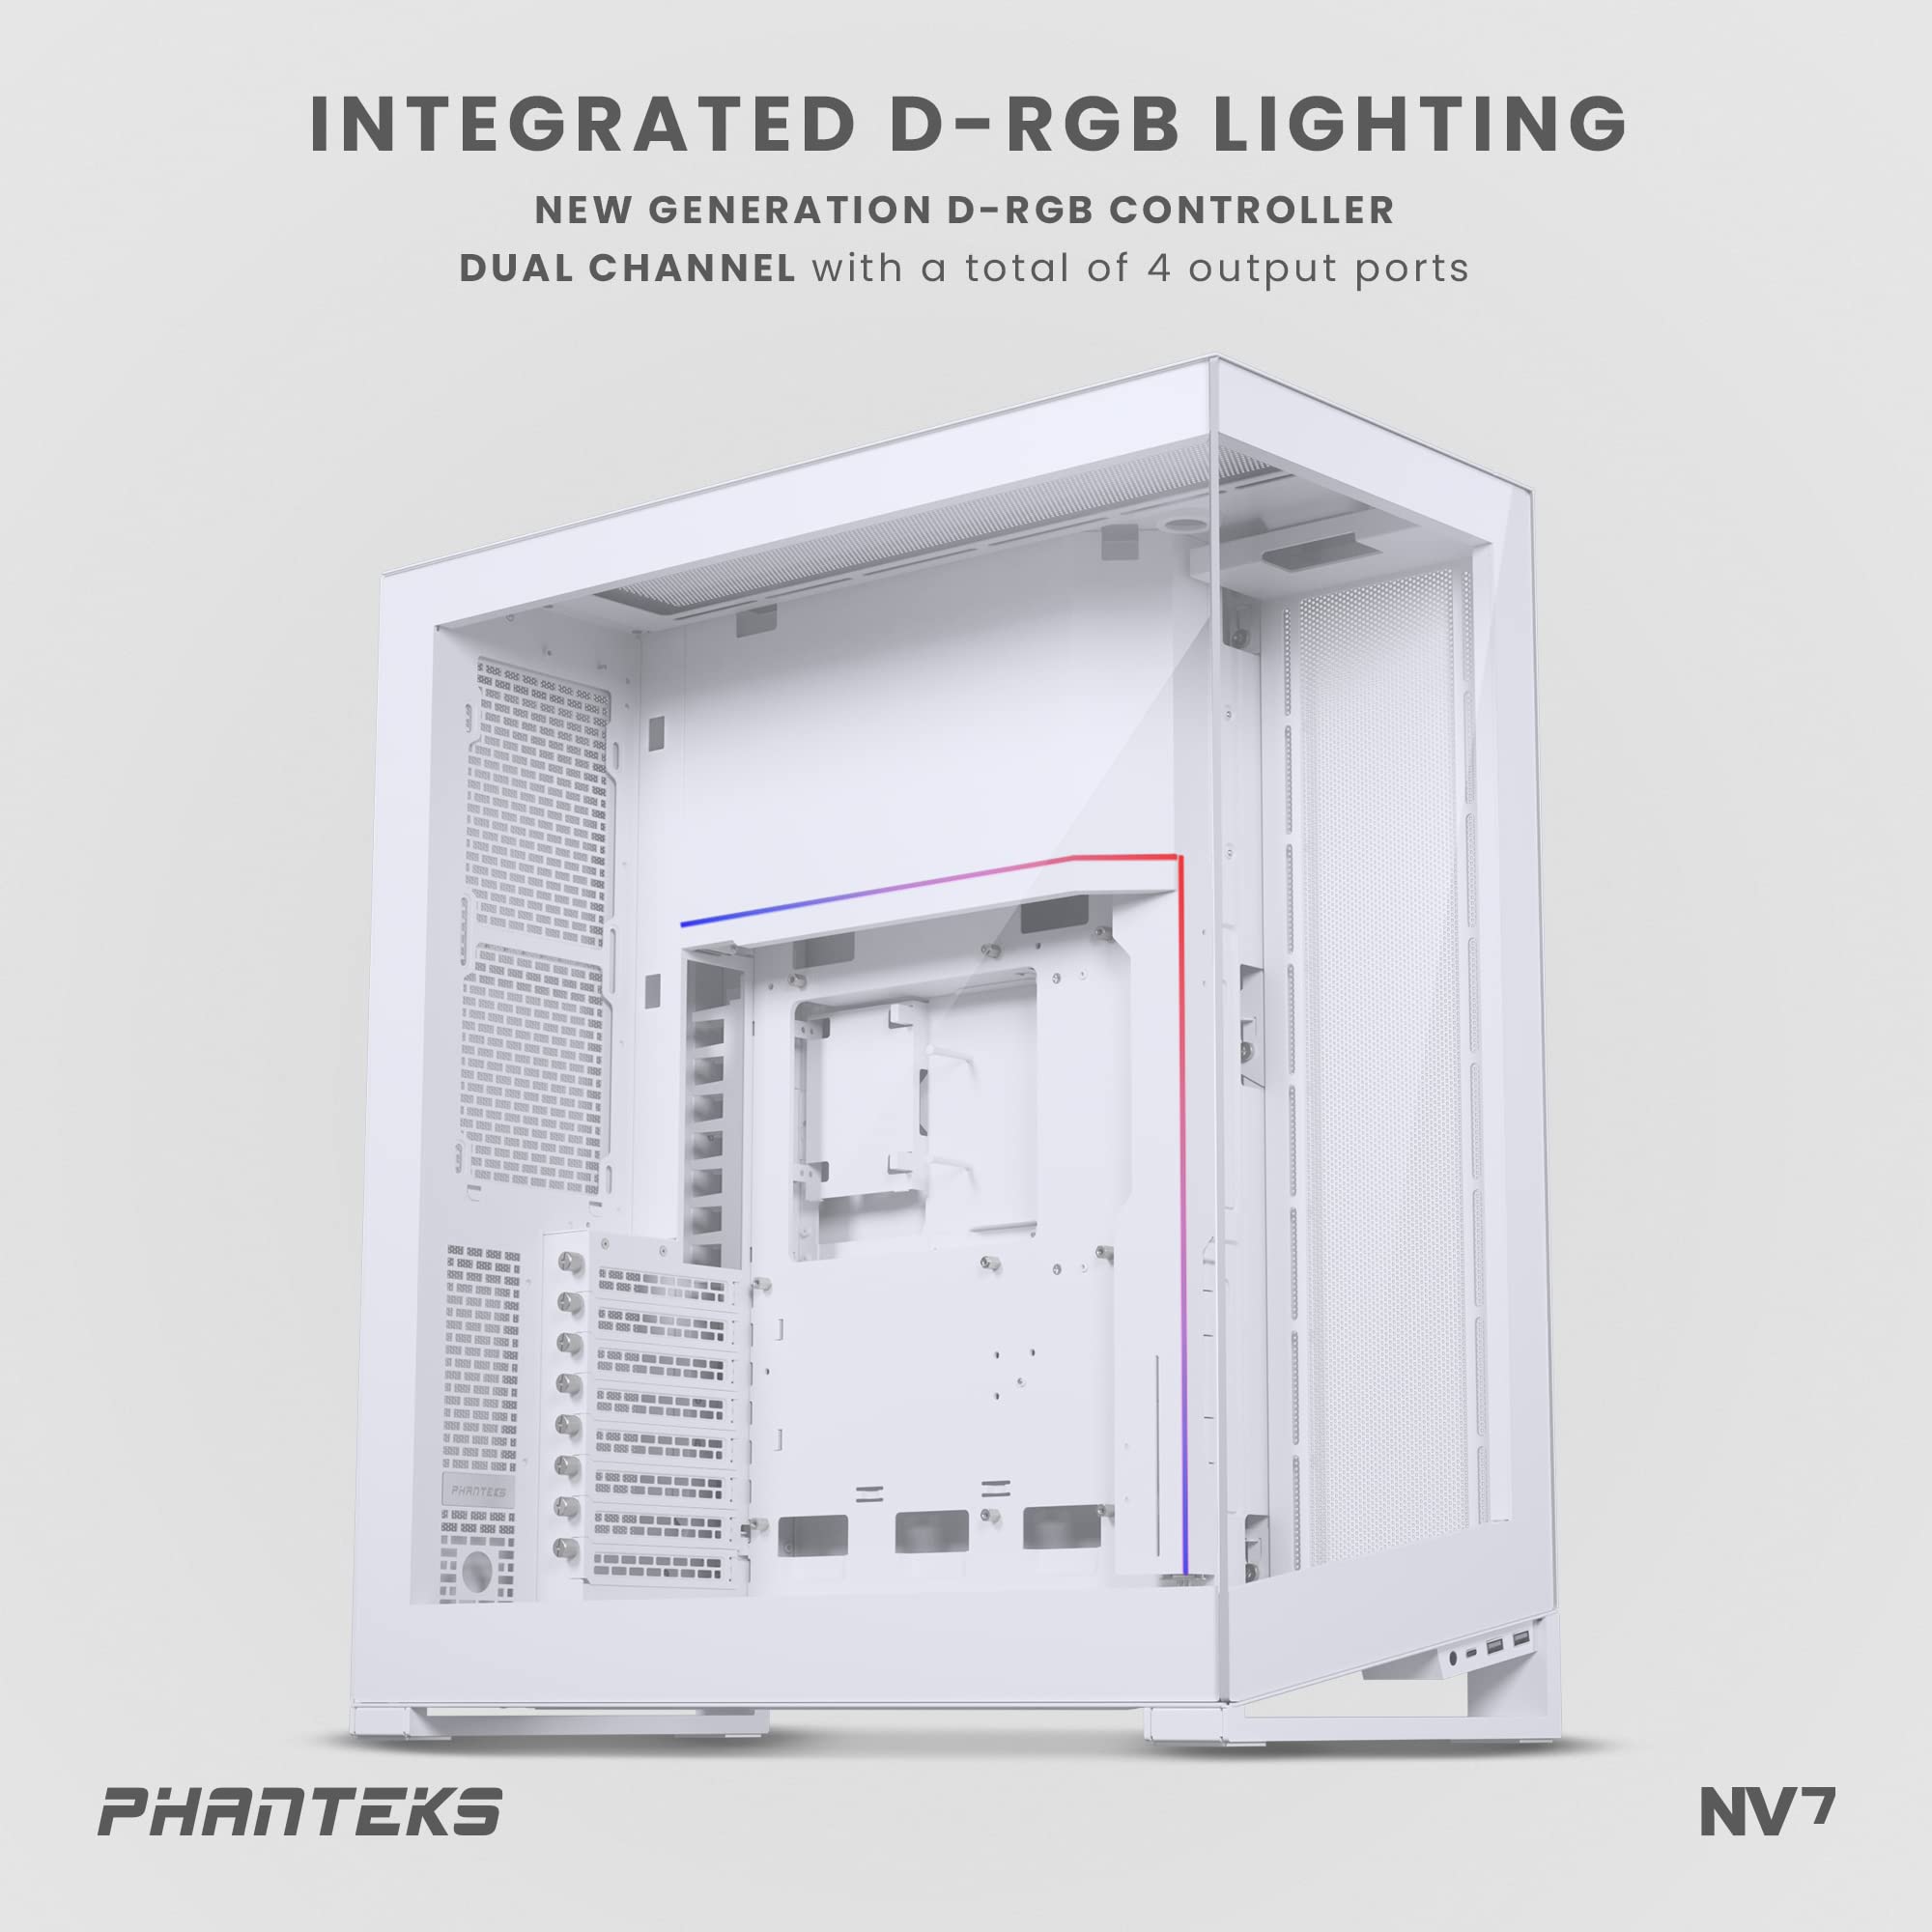 Phanteks (PH-NV723TG_DMW01) NV7 Showcase Full-Tower Chassis, High Airflow Performance, Integrated D/A-RGB Lighting, Seamless Tempered Glass Design, 12 Fan Positions, Matte White